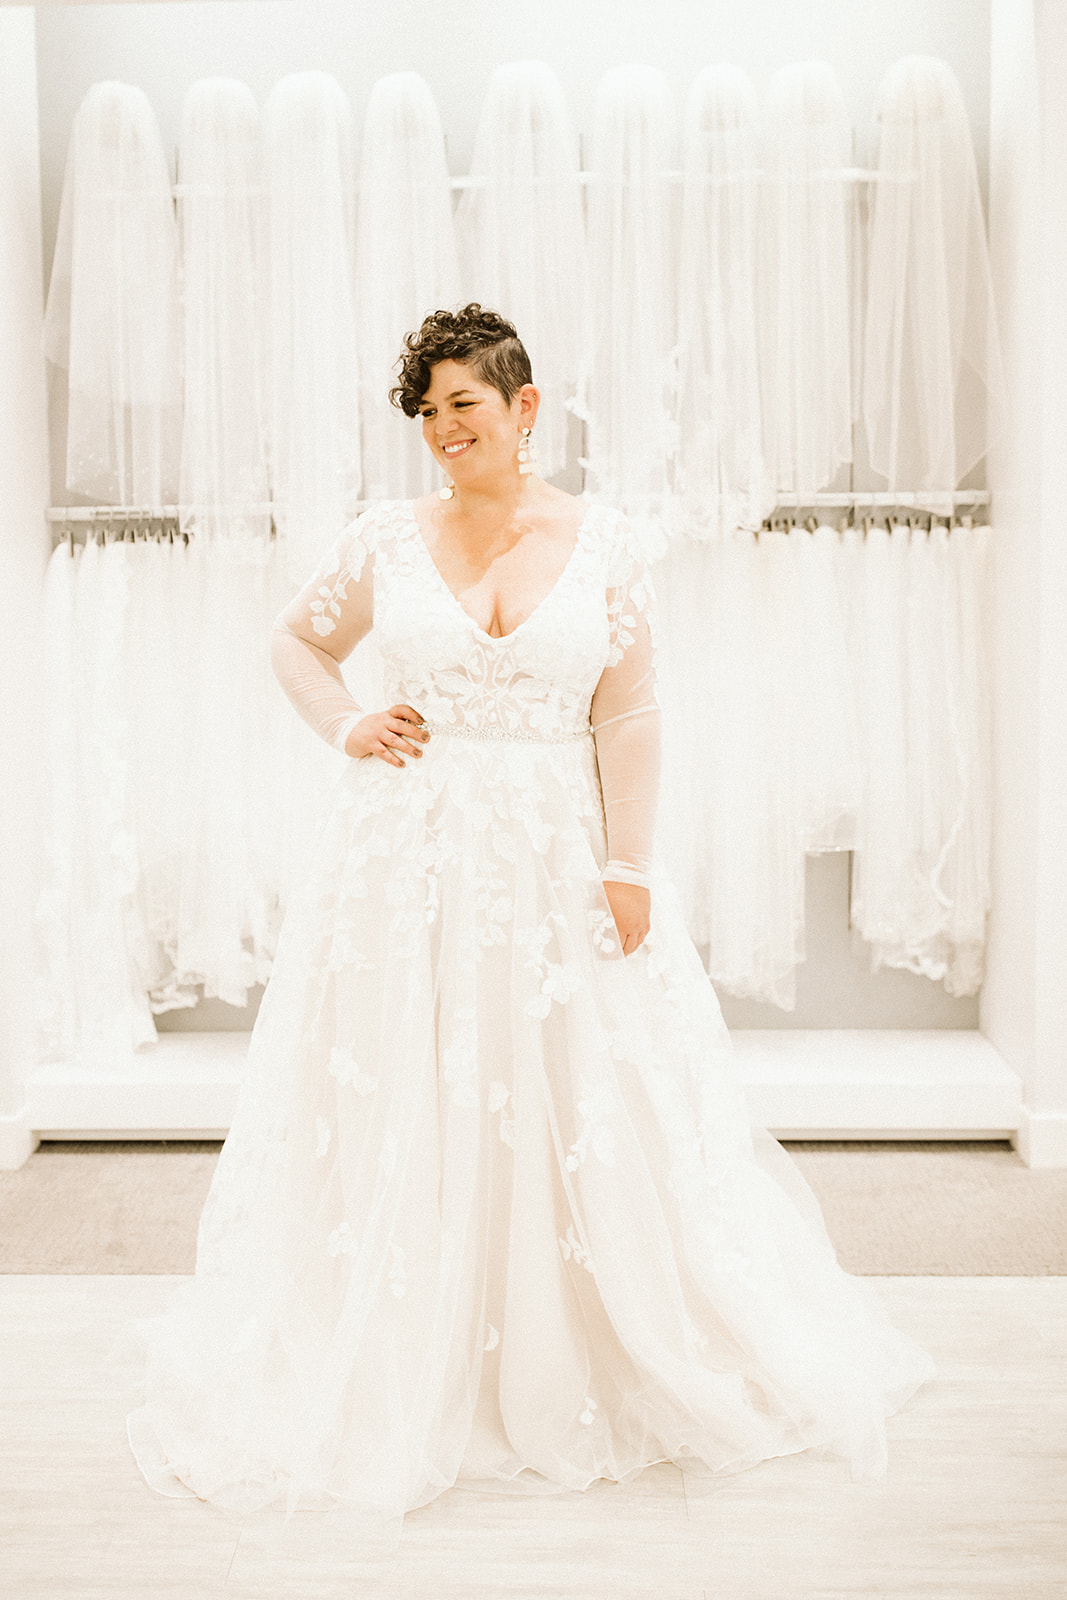 A woman with short brown hair stands in a long sleeve lace wedding gown in front of a wall of veils at David's Bridal